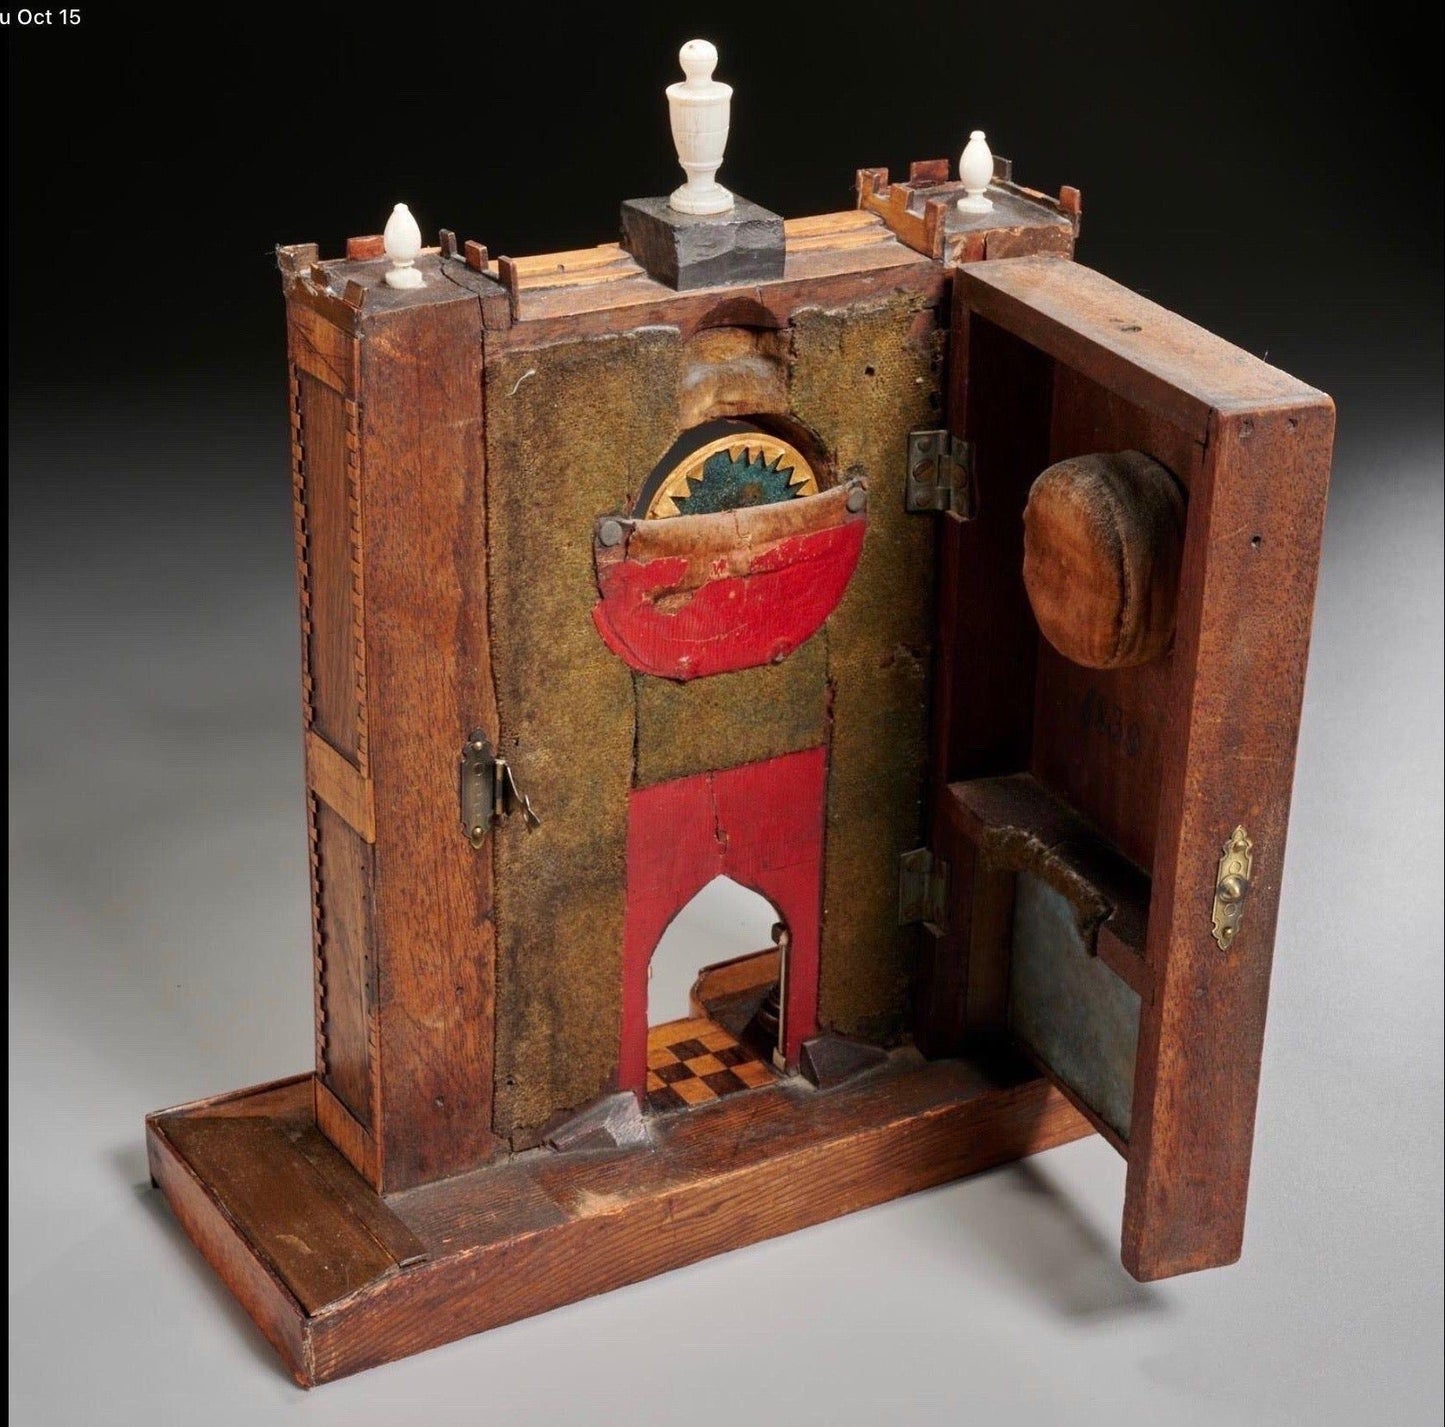 Gothic Revival Architectural Model for a Watchstand , English, circa 1830